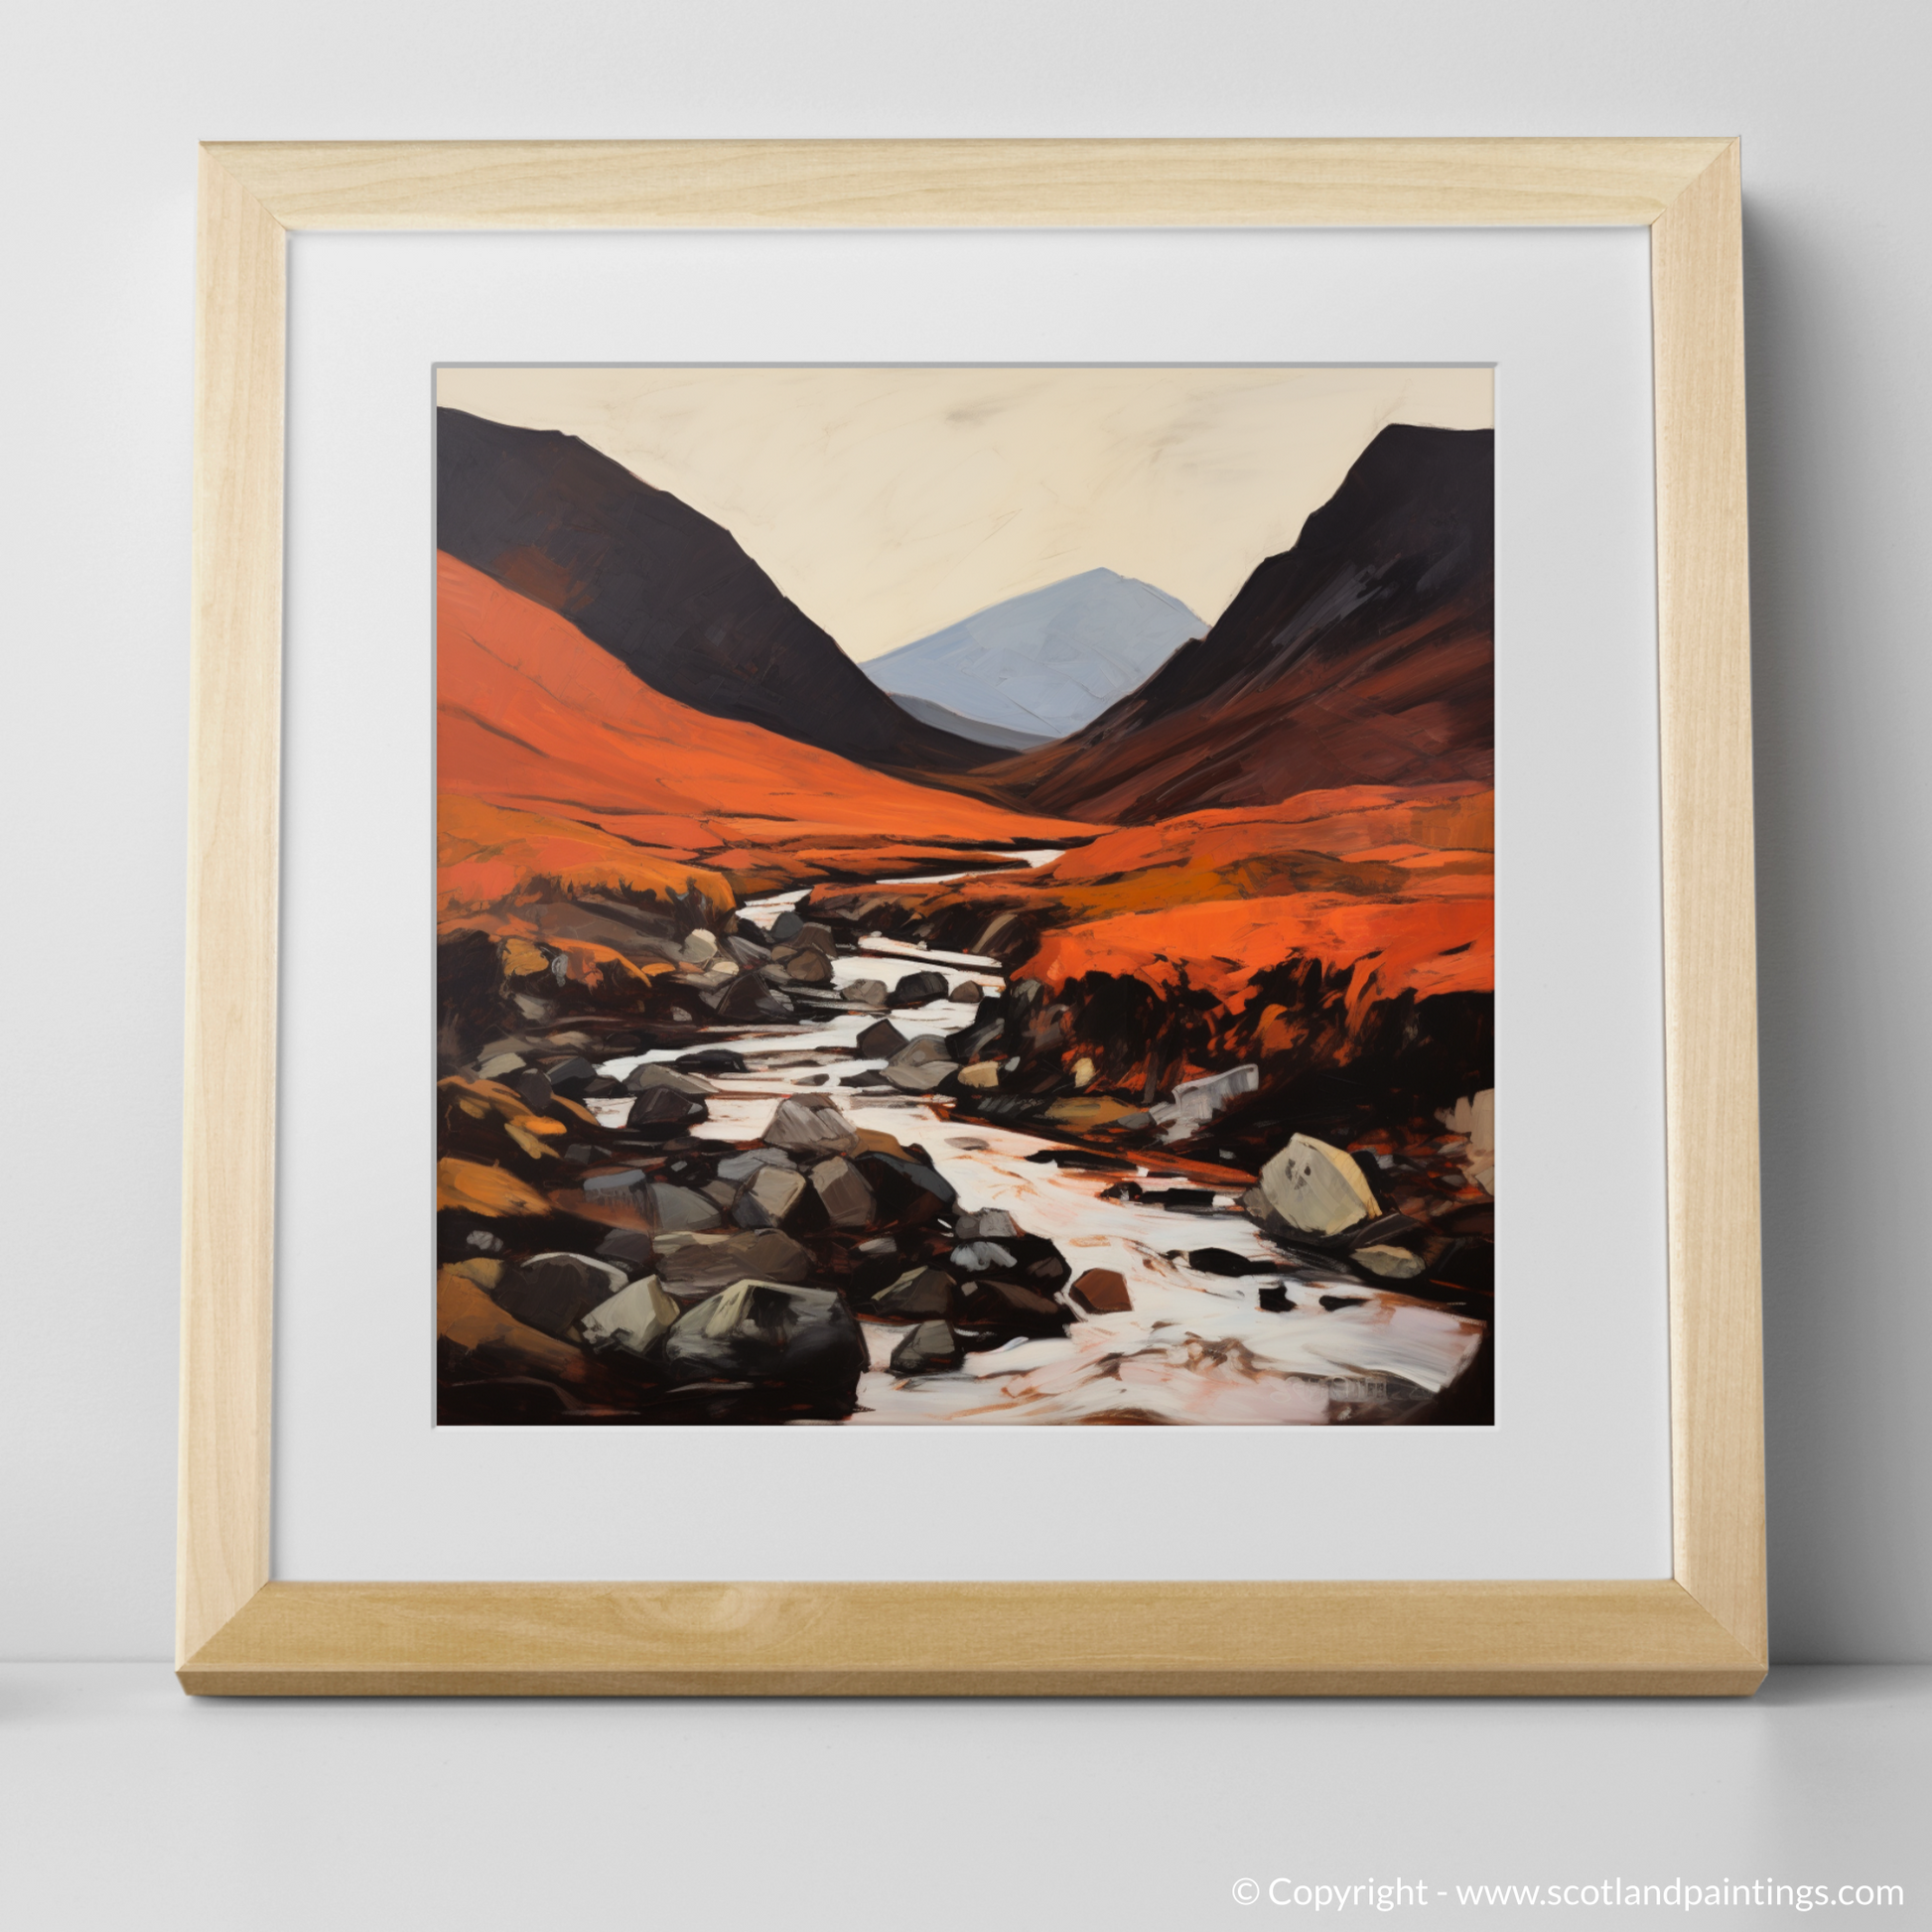 Art Print of Glen Rosa, Isle of Arran with a natural frame